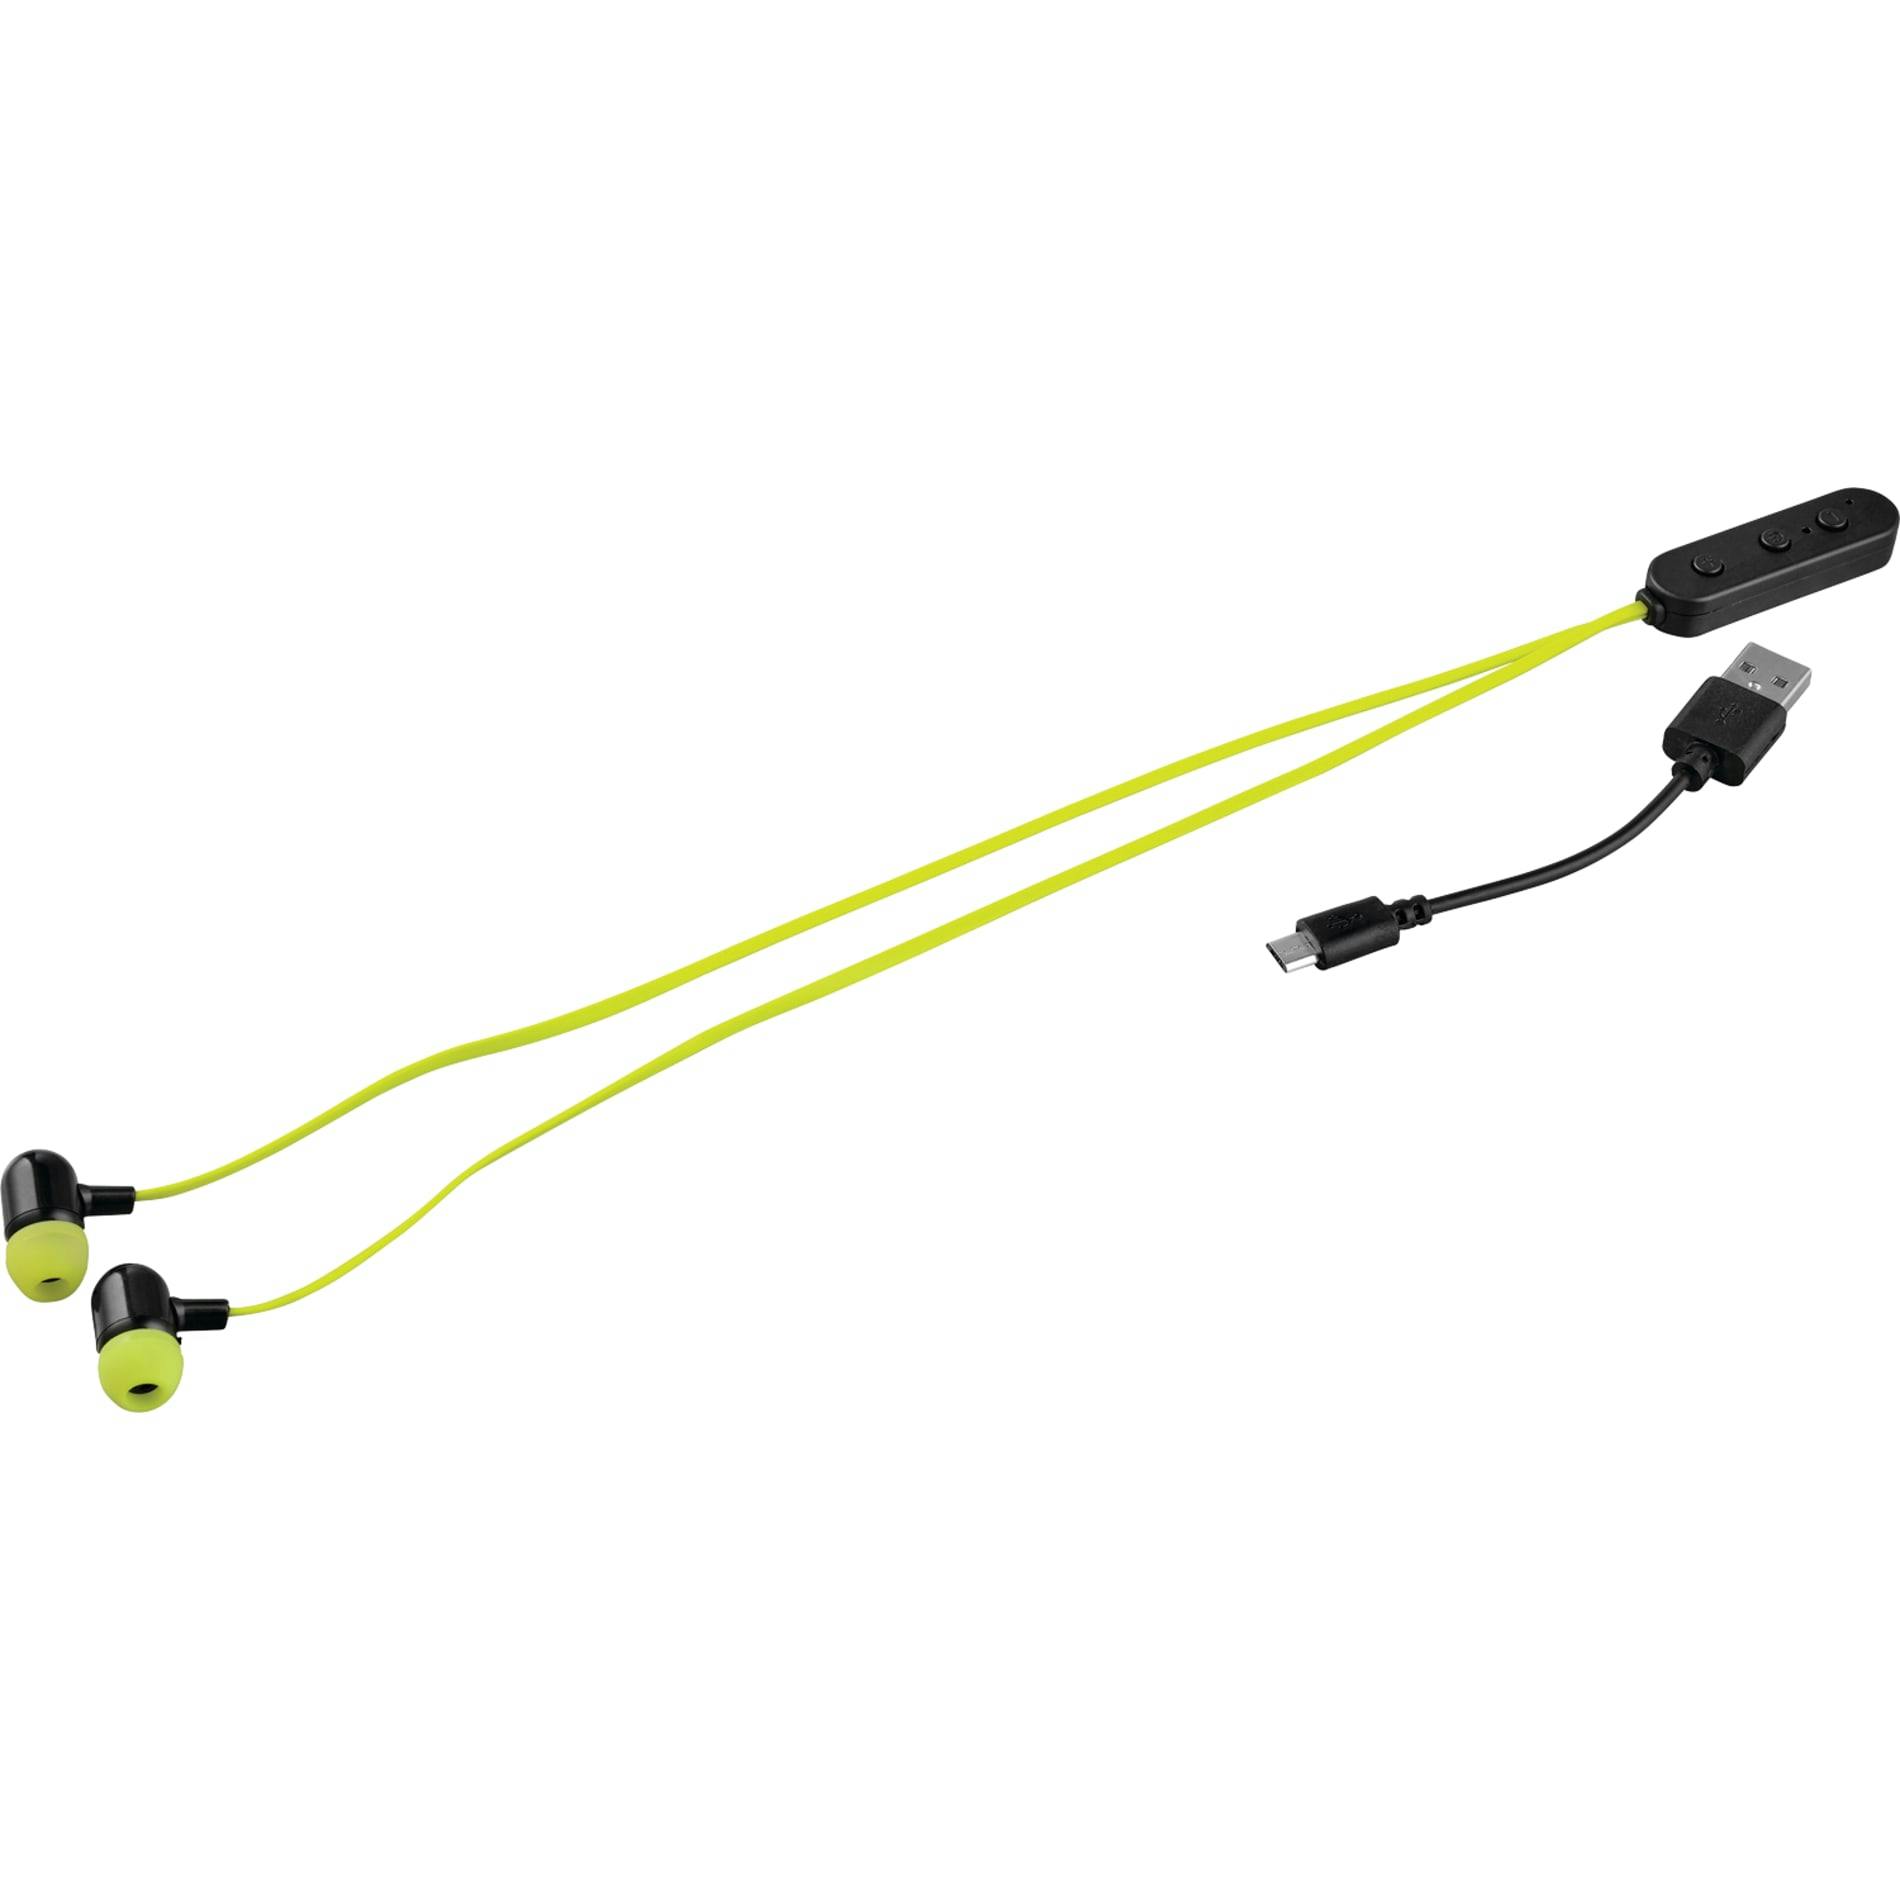 Color Pop Bluetooth Earbuds - additional Image 2